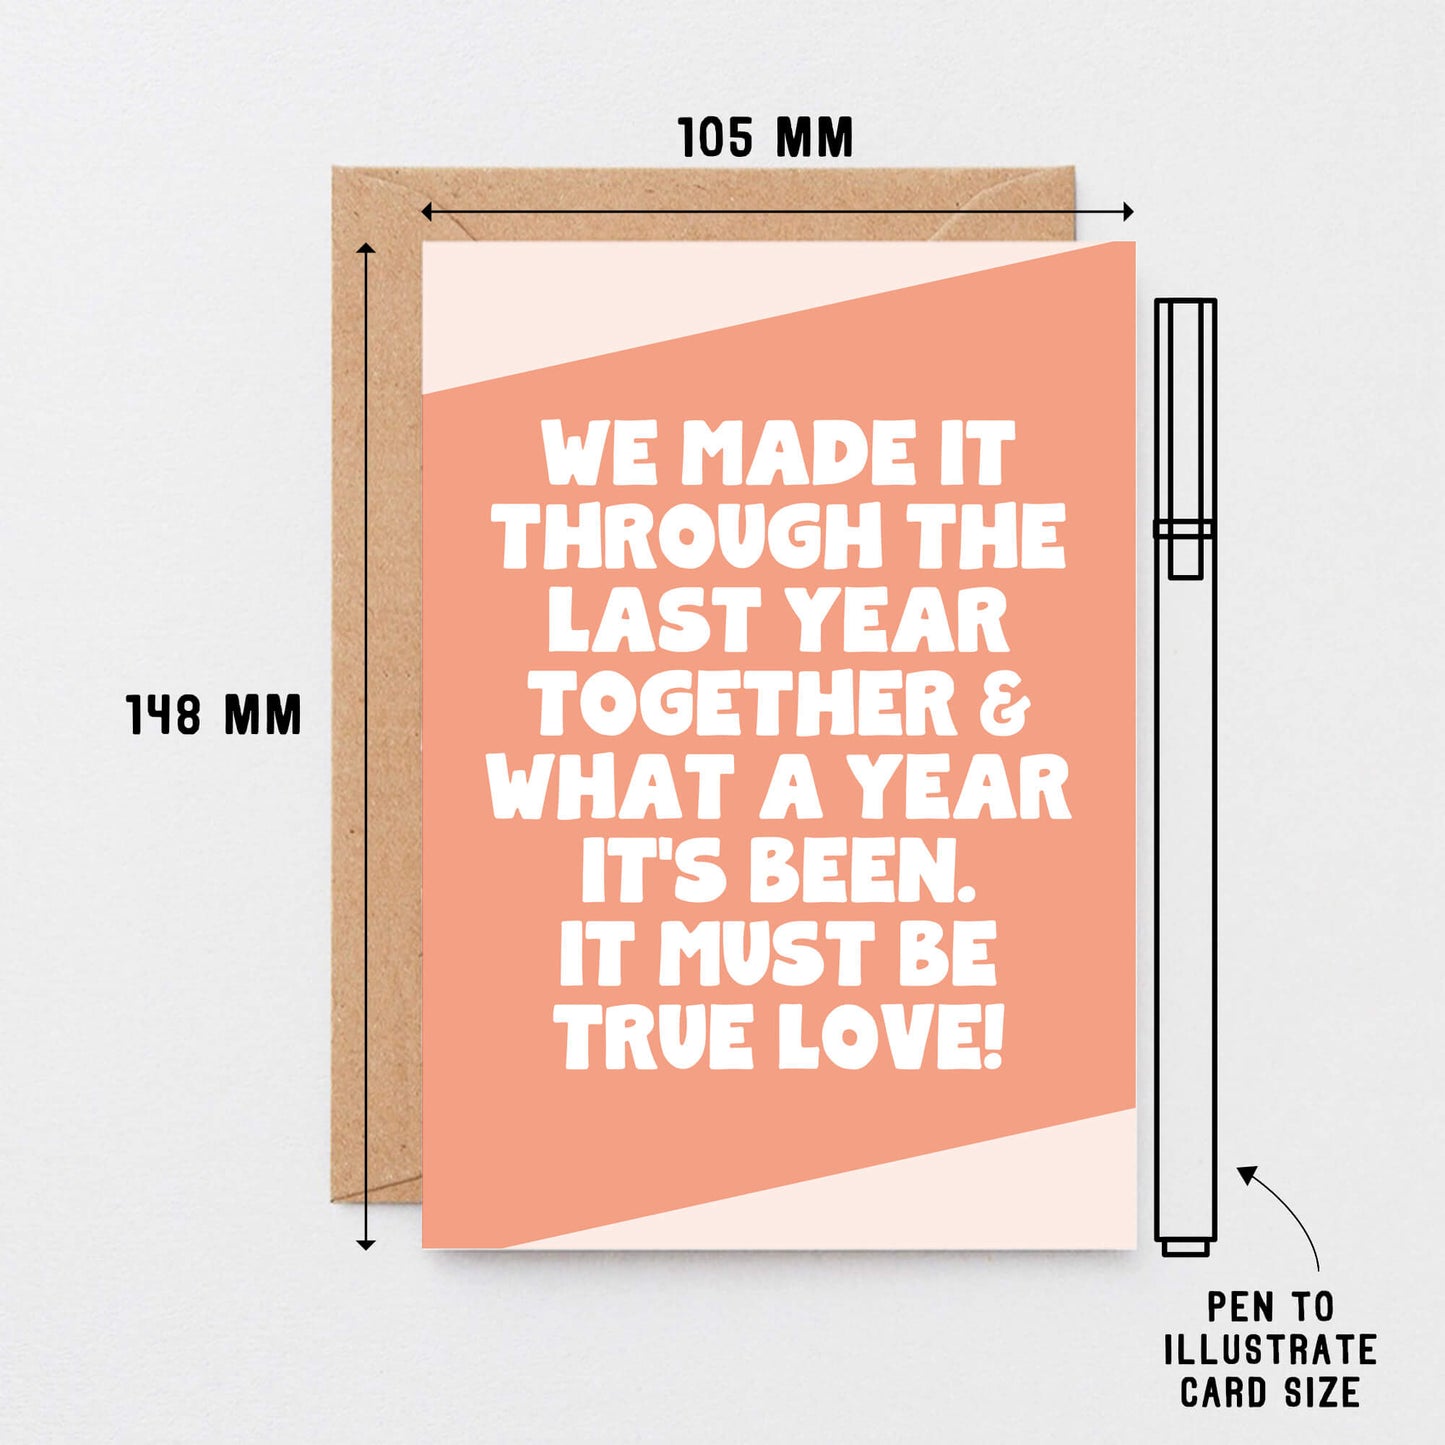 Love Card by SixElevenCreations. Card reads We made it through the last year together & what a year it's been. It must be true love! Product Code SE3074A6